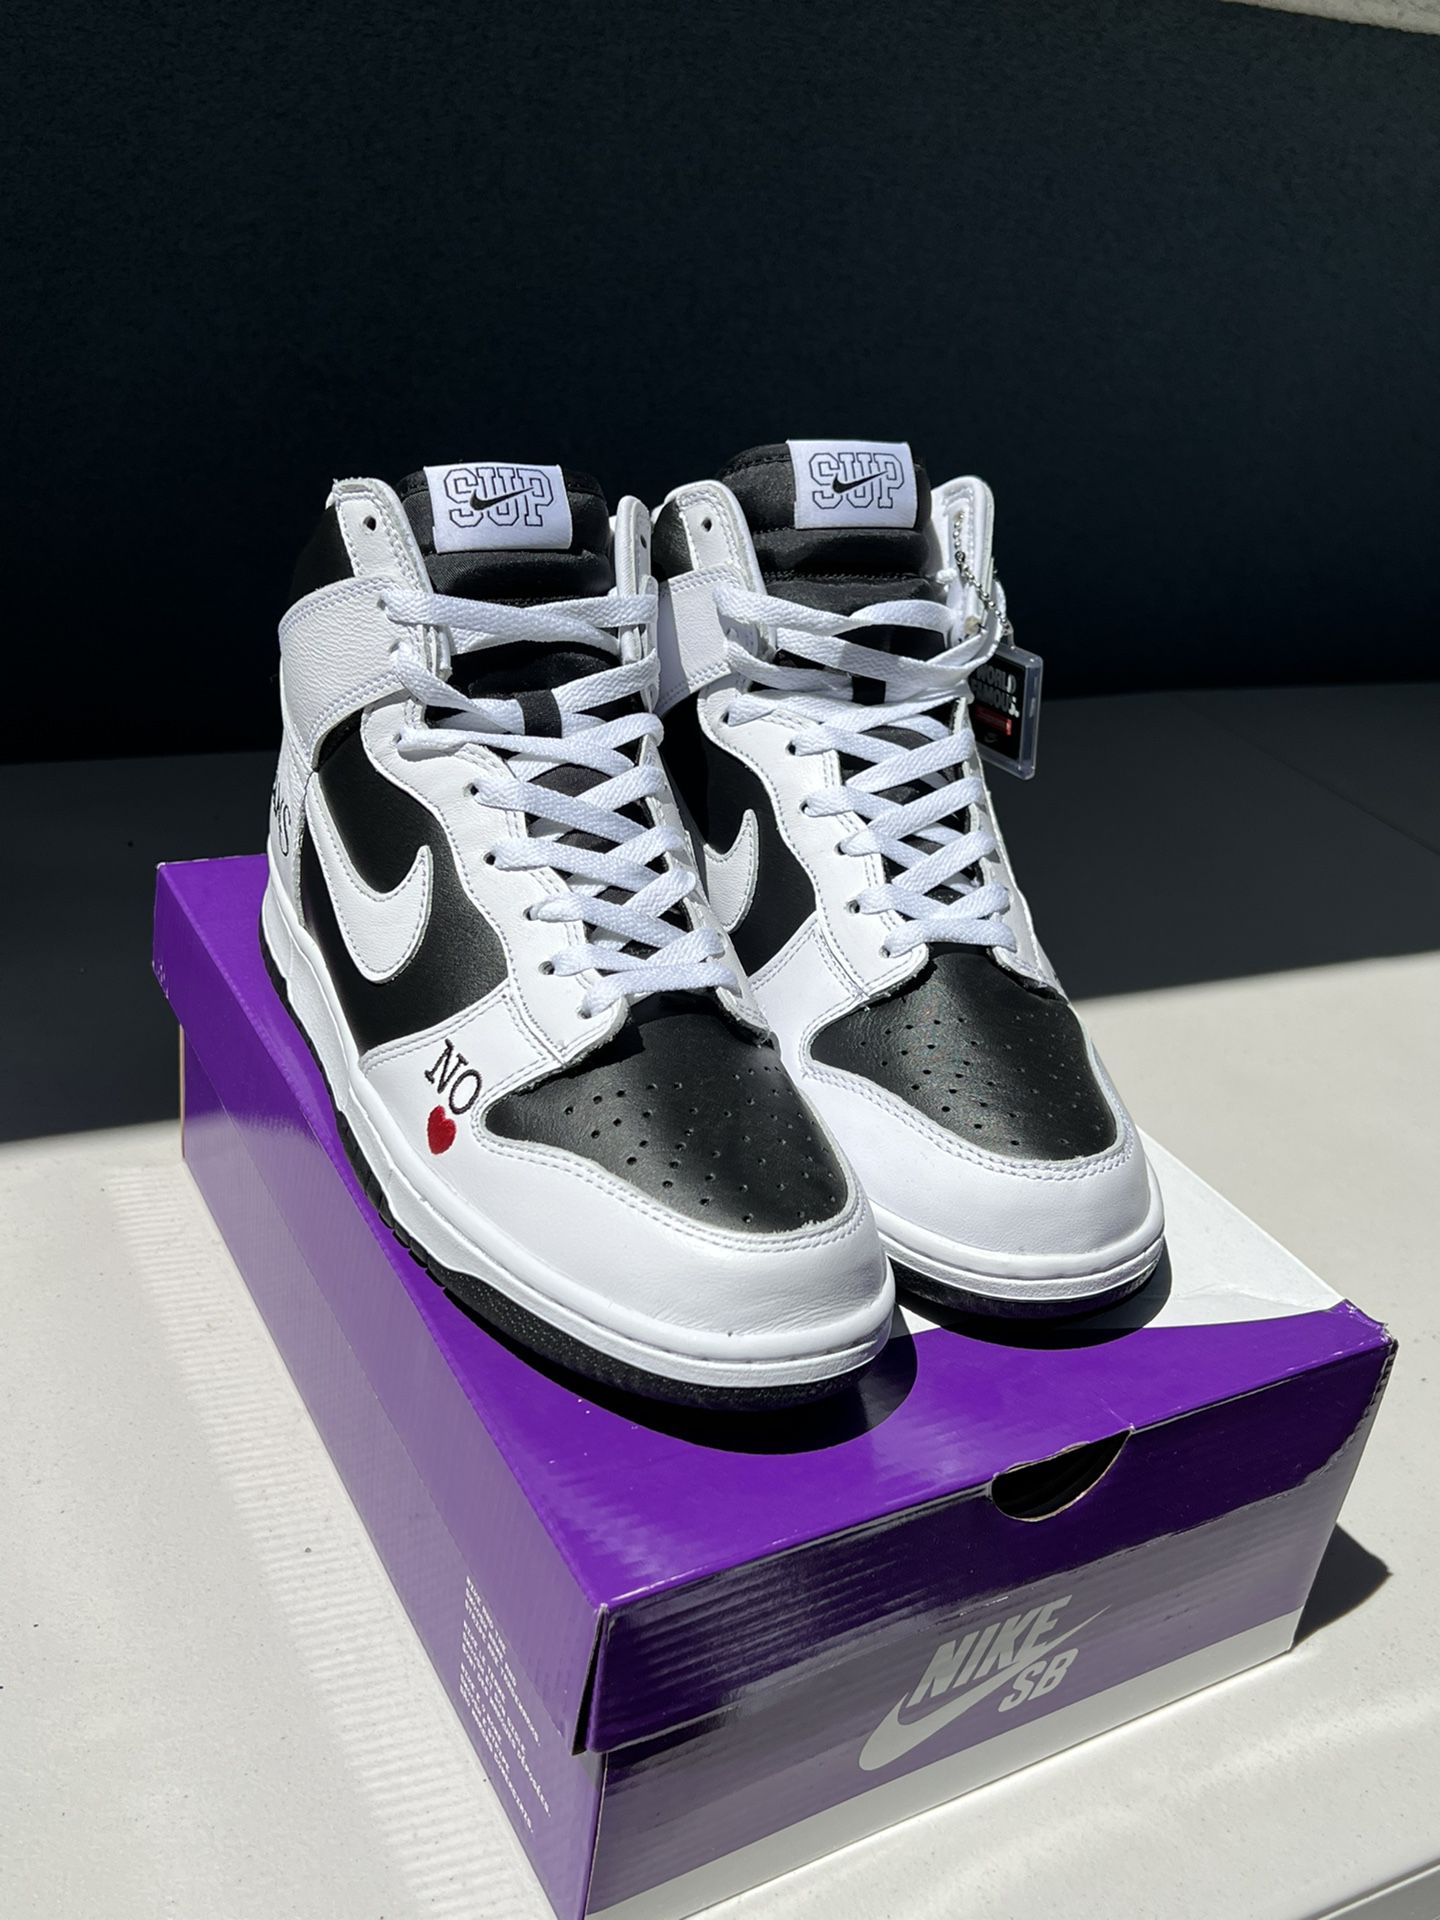 Supreme X Dunk High Black/white By Any means 